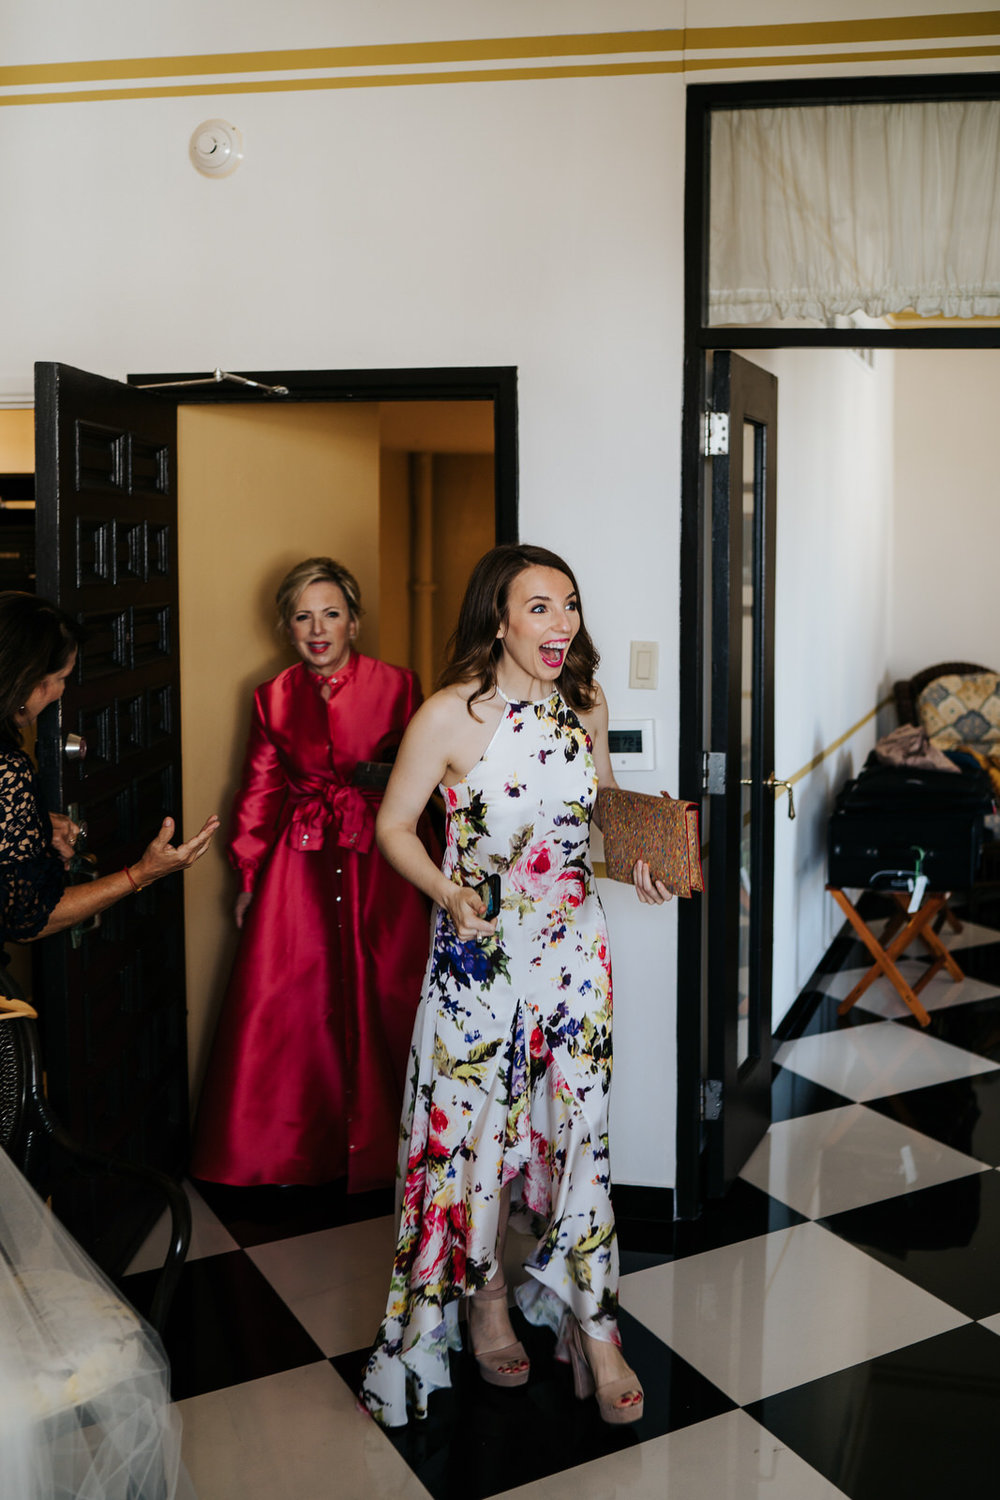  Groom's sister and mother enter the room where bride is getting ready for wedding and smile in shock when they see her 